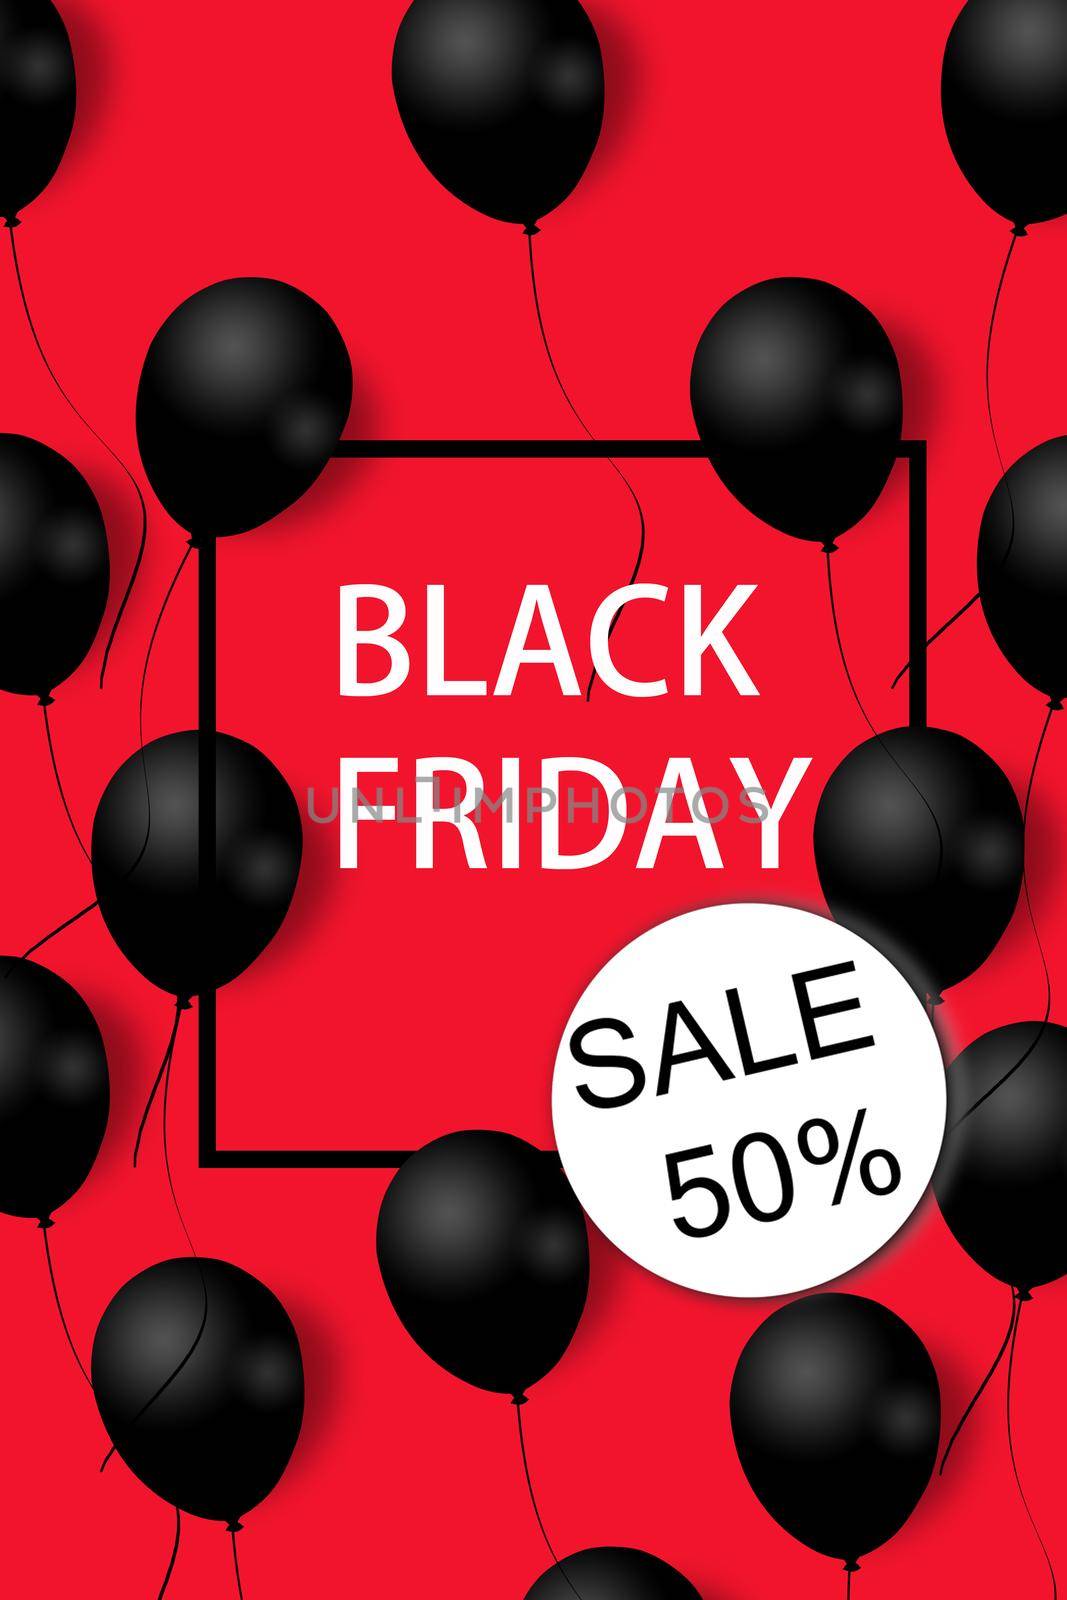 Black Friday Sale Poster with black balloons on red background with square frame. Illustration. by nazarovsergey